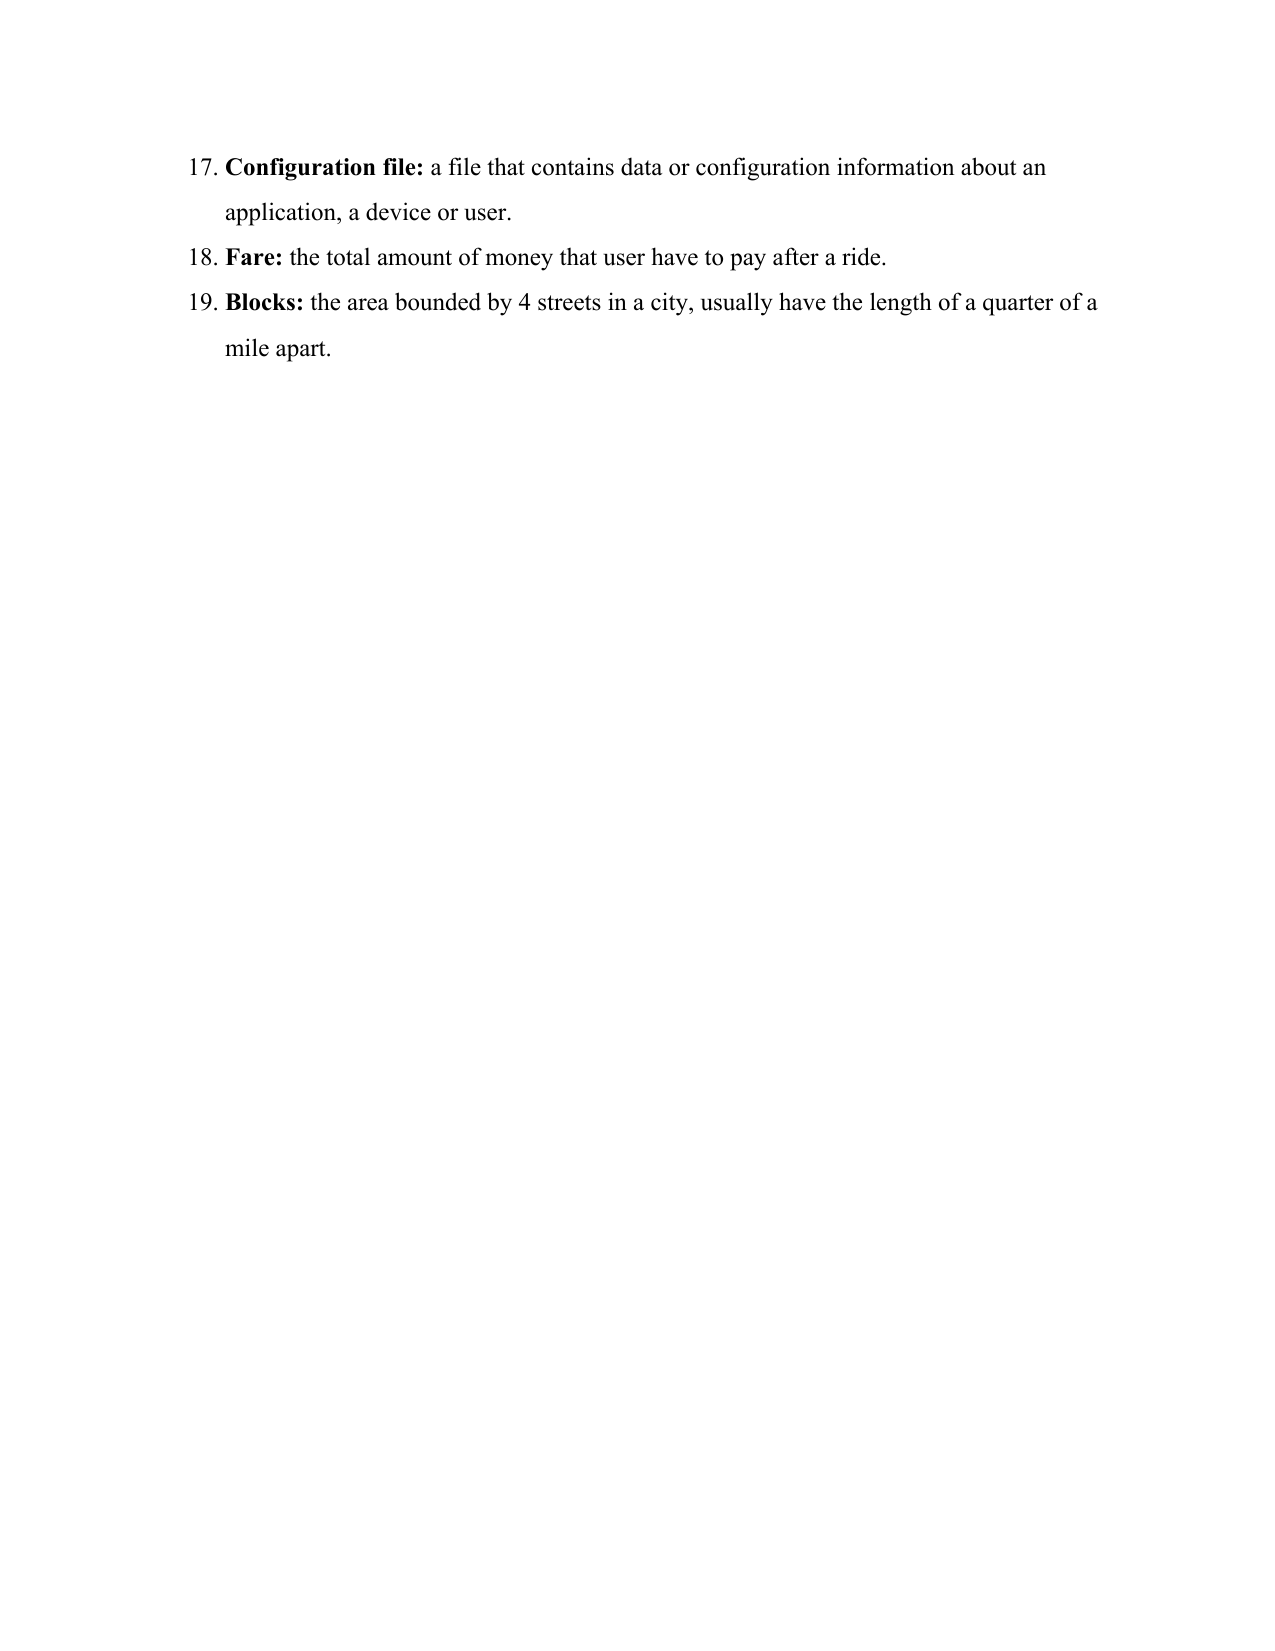 Page 4 of 12 - Taxi User Manual